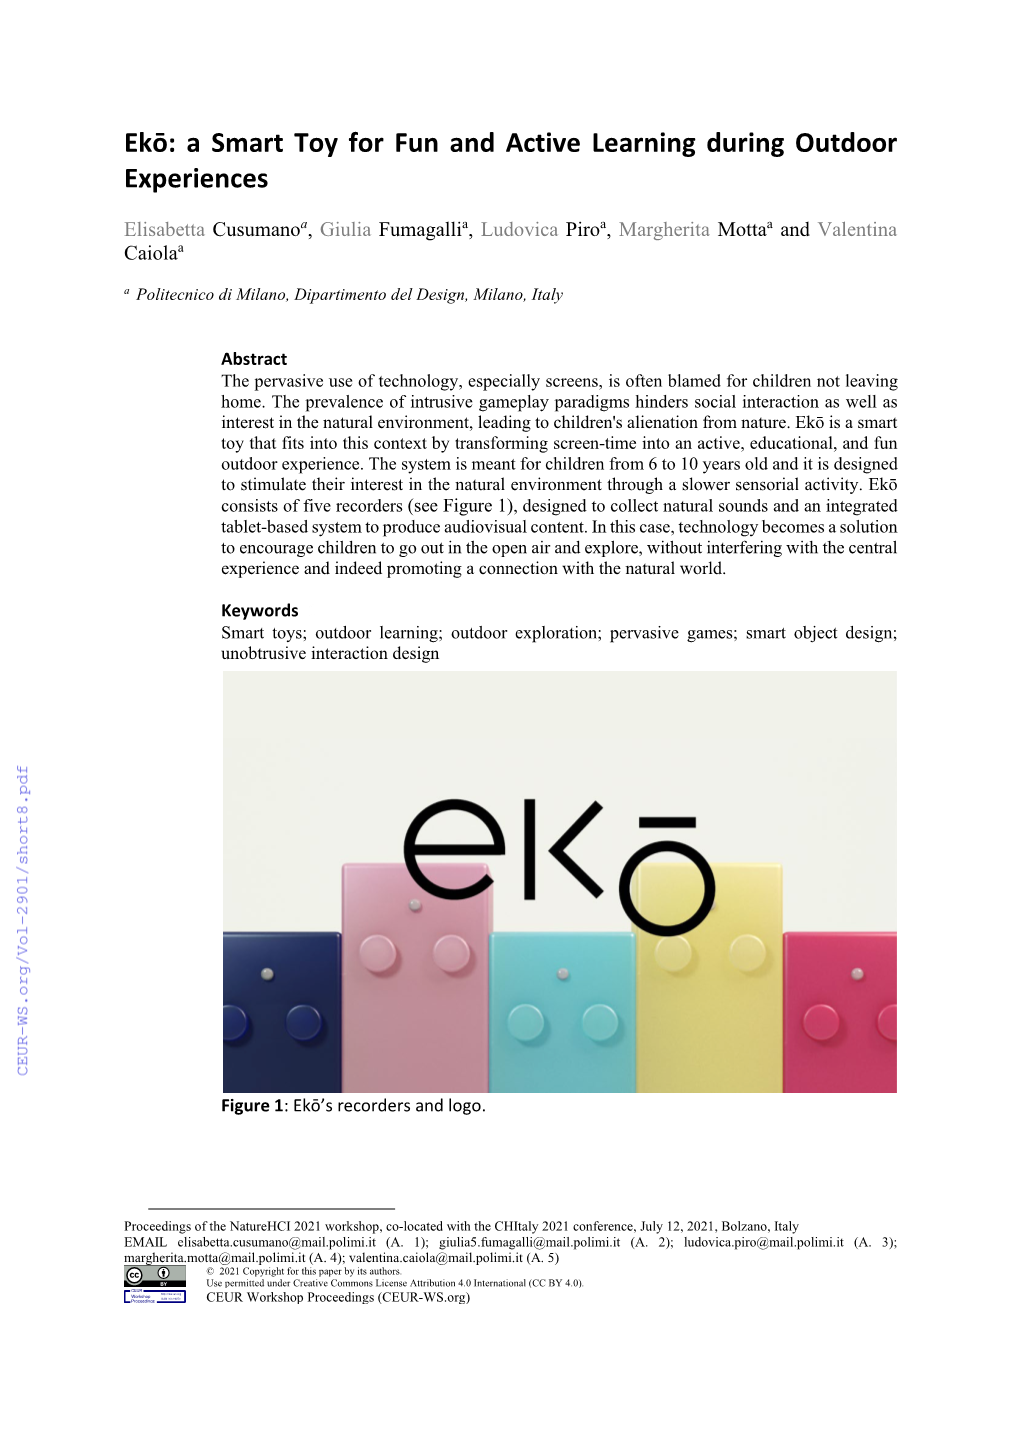 Ekō: a Smart Toy for Fun and Active Learning During Outdoor Experiences